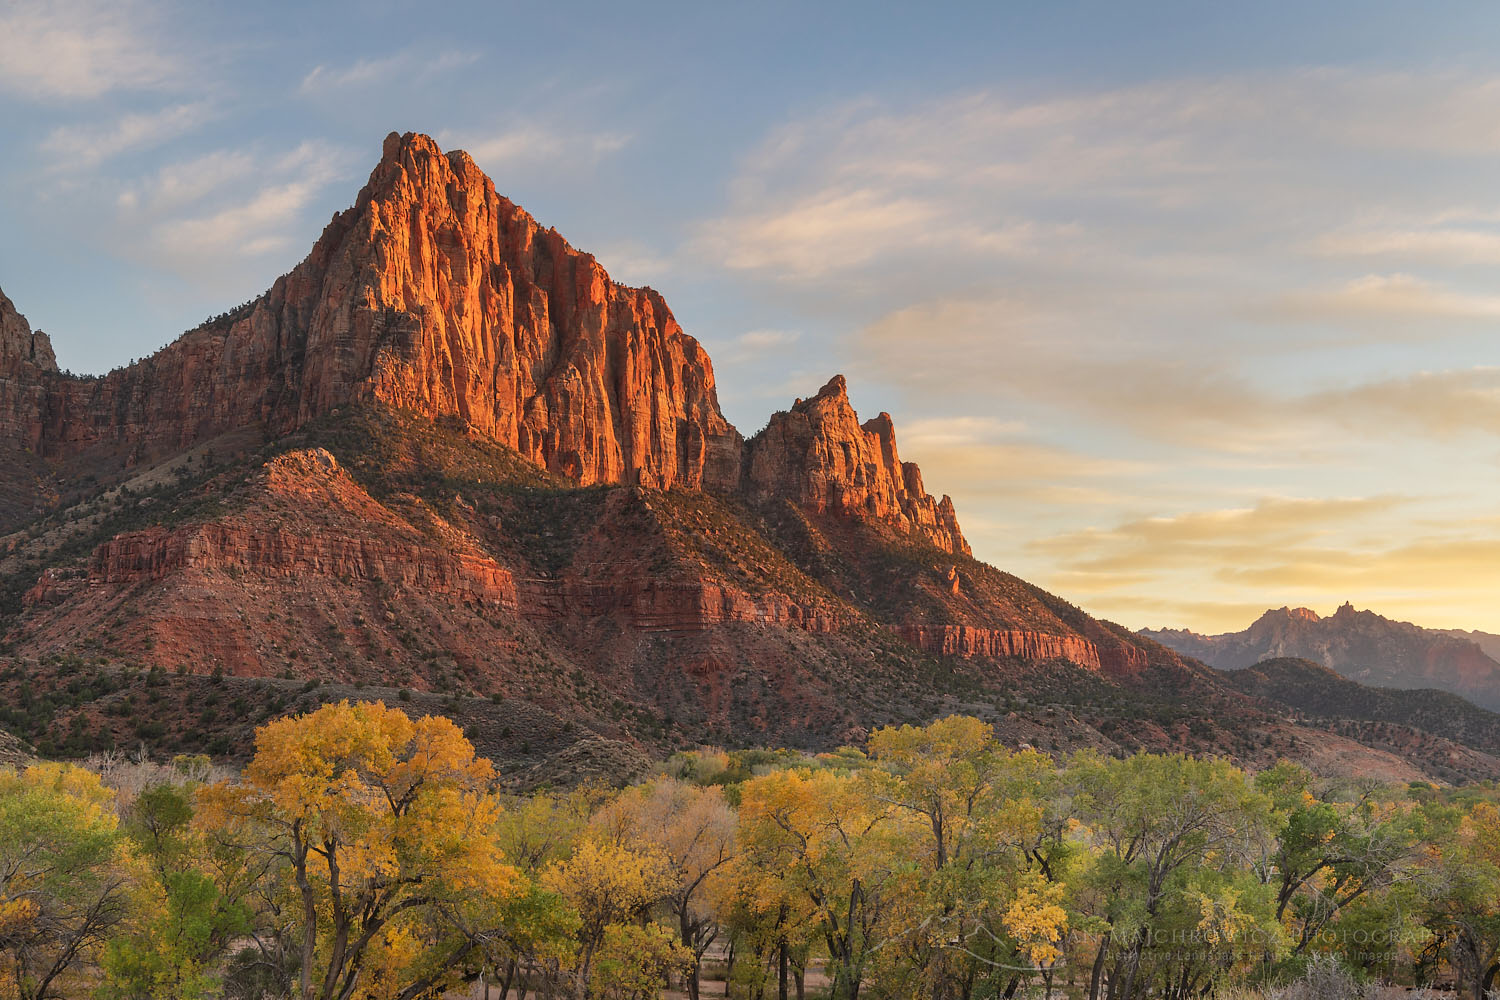 Autumn sunset on The Watchman Zion National Park